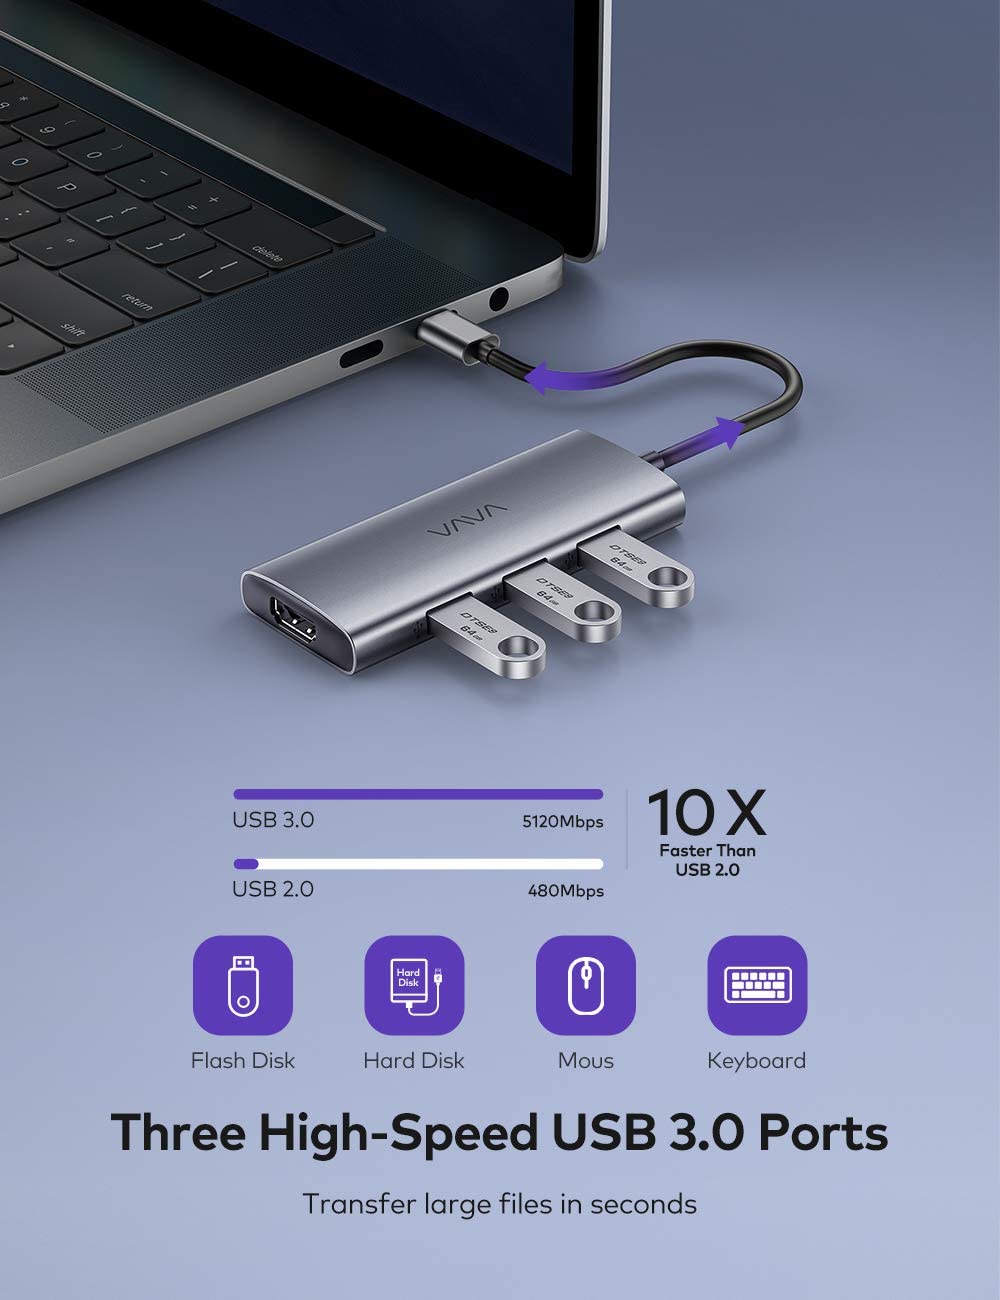 VAVA 7-in-1 USB-C Hub (Ports: 3 USB 3.0, SD Card, TF Card, PD, HDMI) with 100W Charging 4k Video Output VA-UCO17